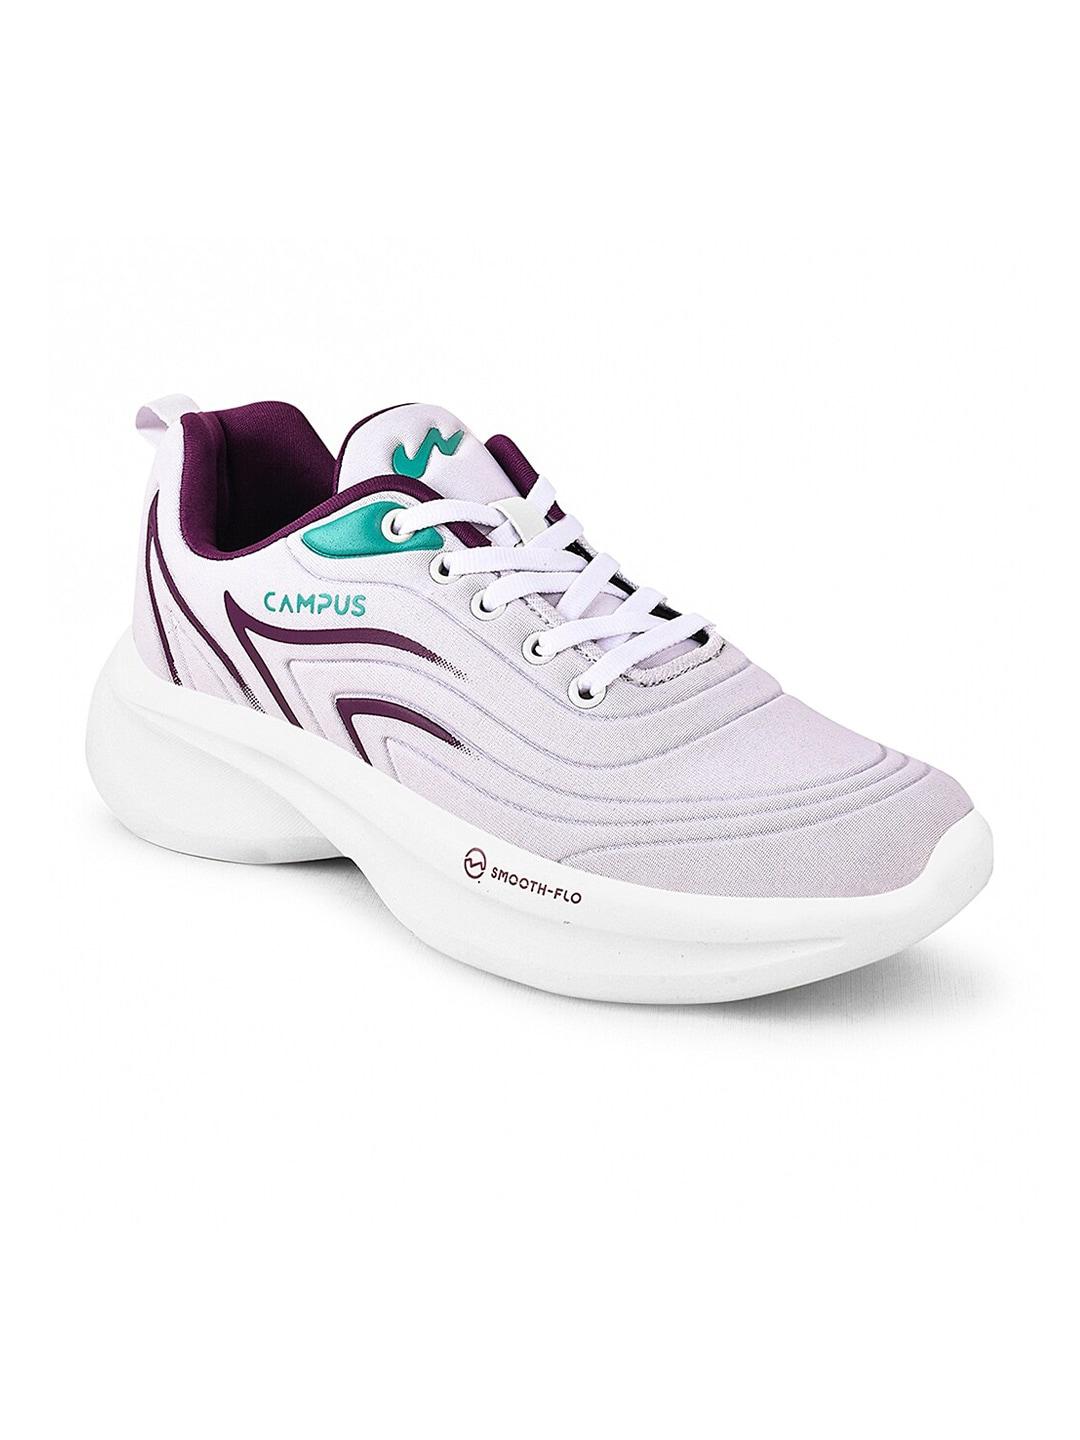 campus-women-candid-mesh-running-shoes